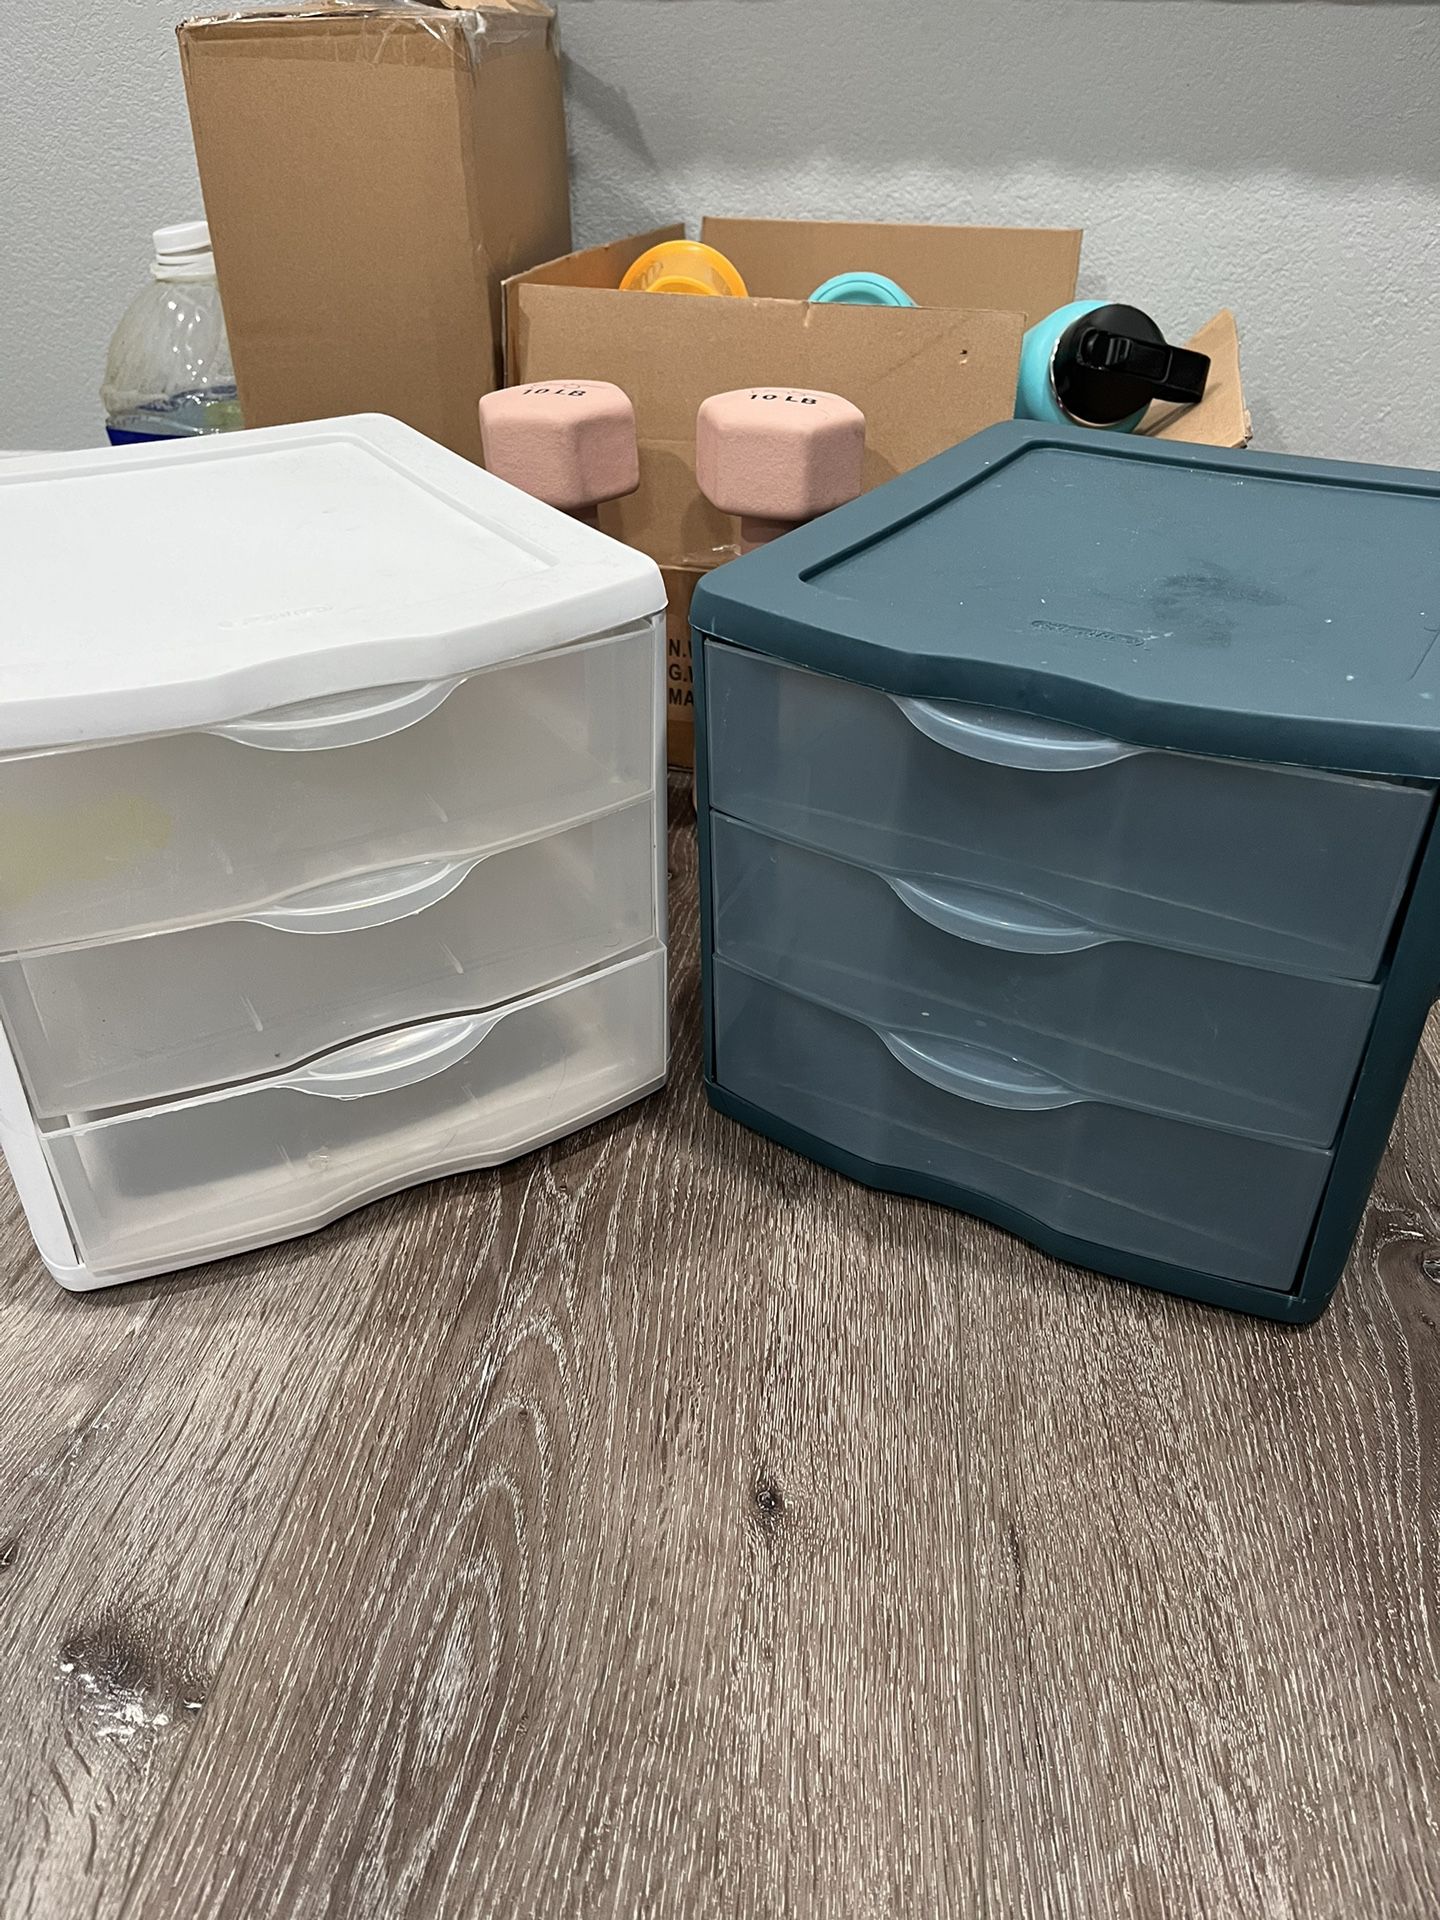 Drawers / Storage Container 